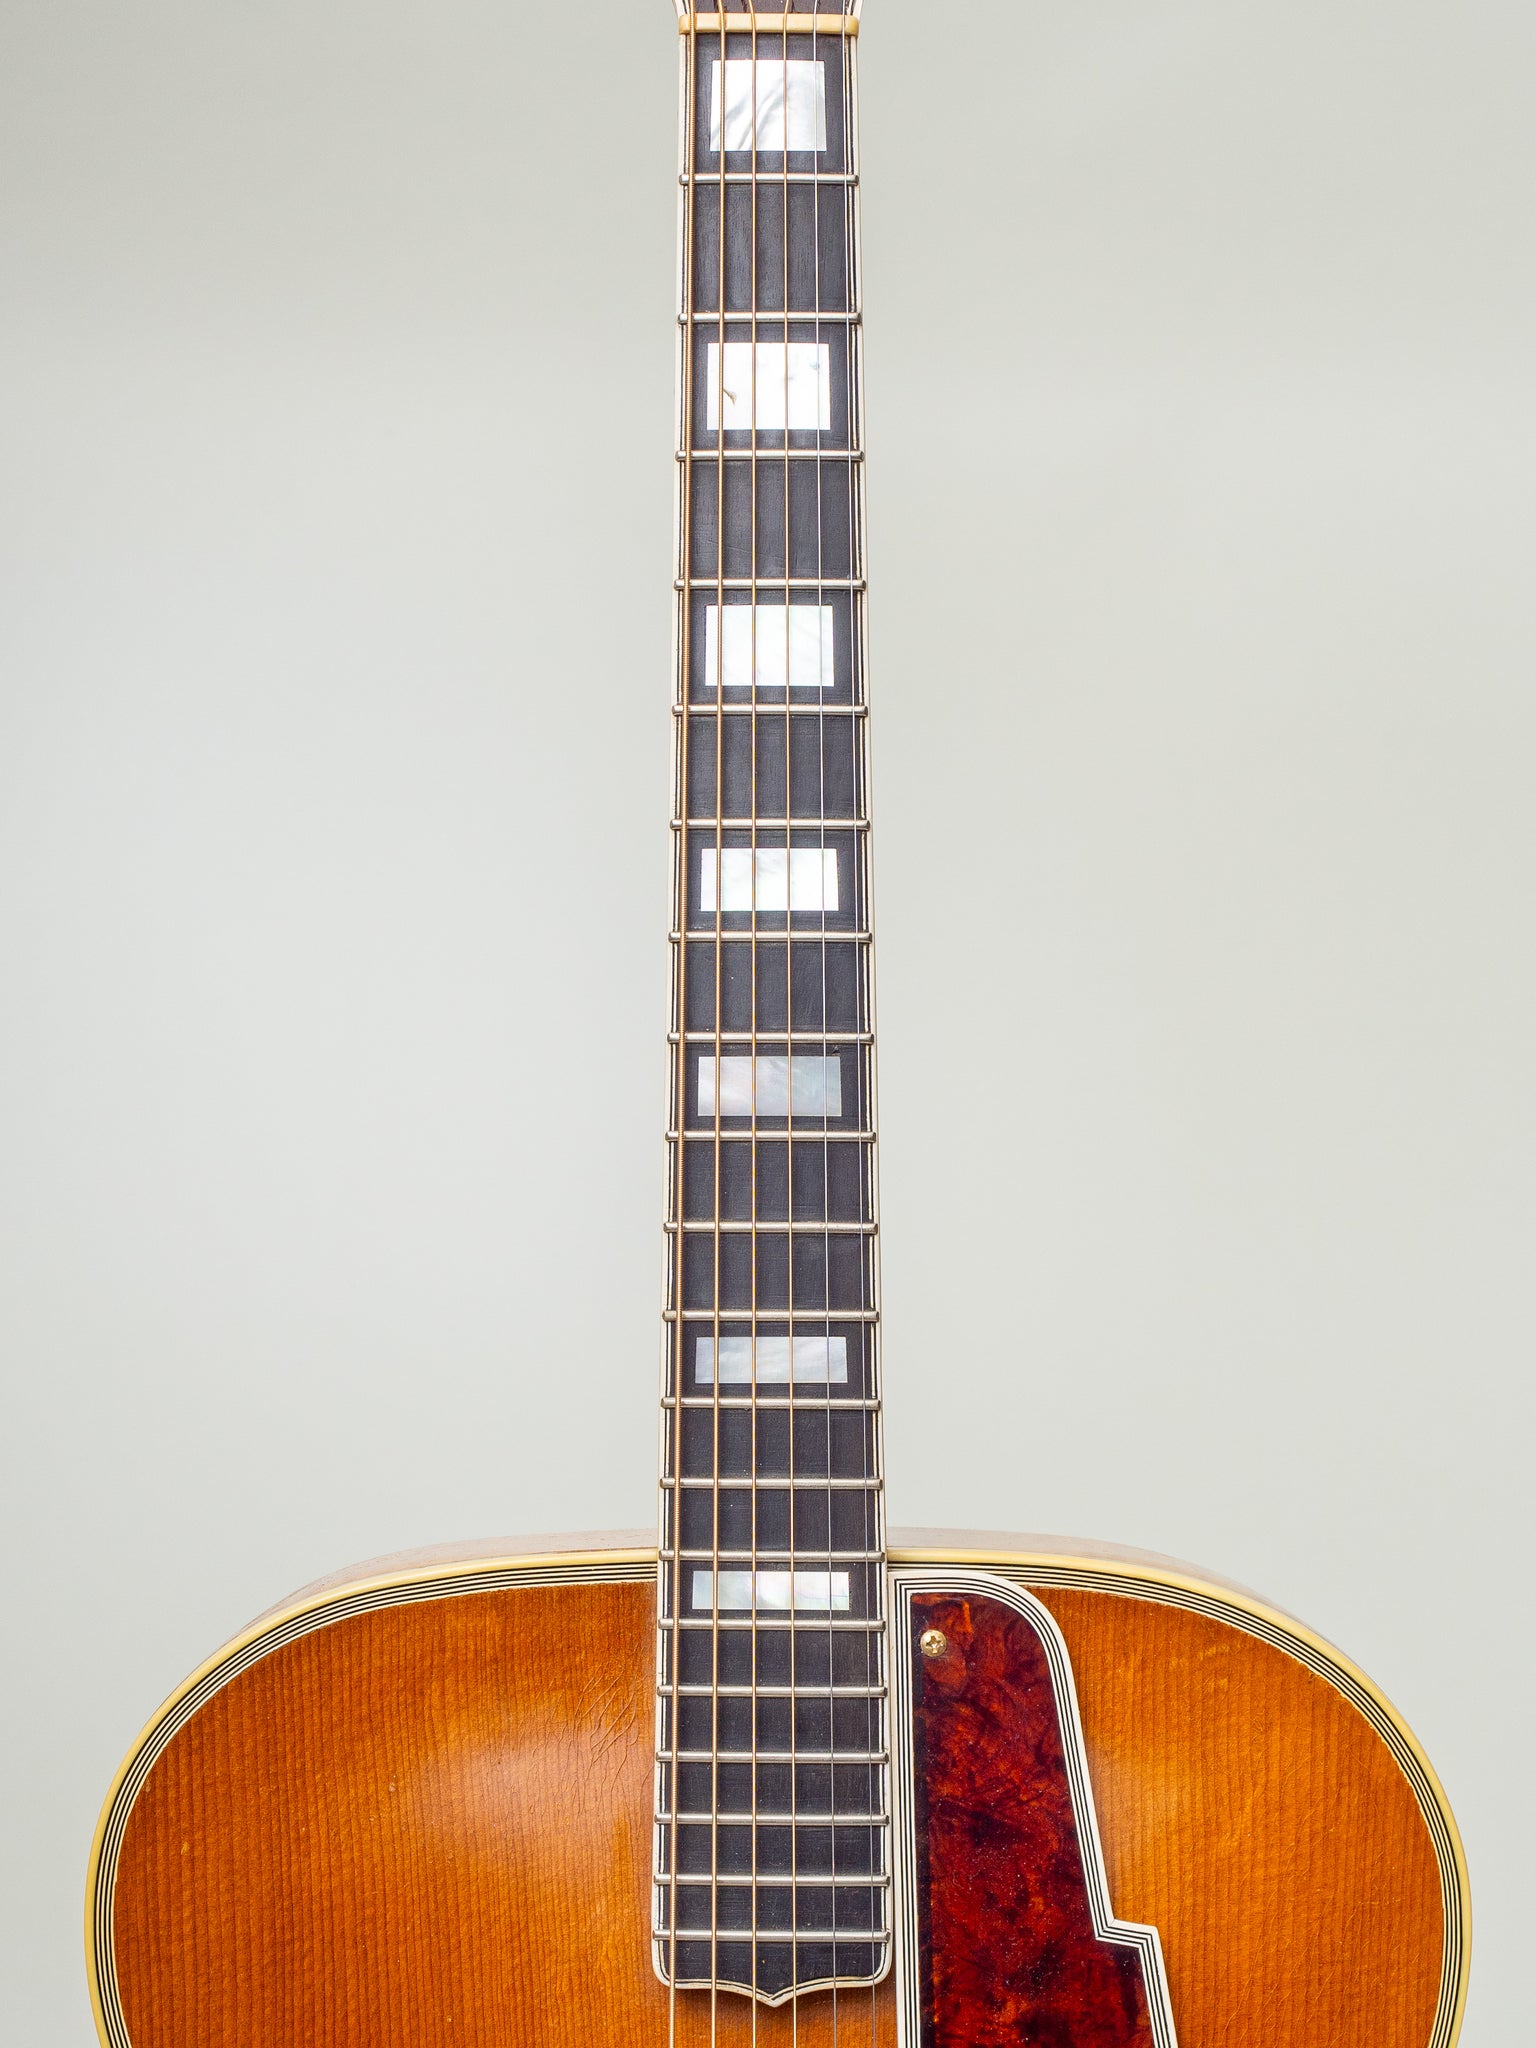 1947 D'Angelico Excel SN: 1769